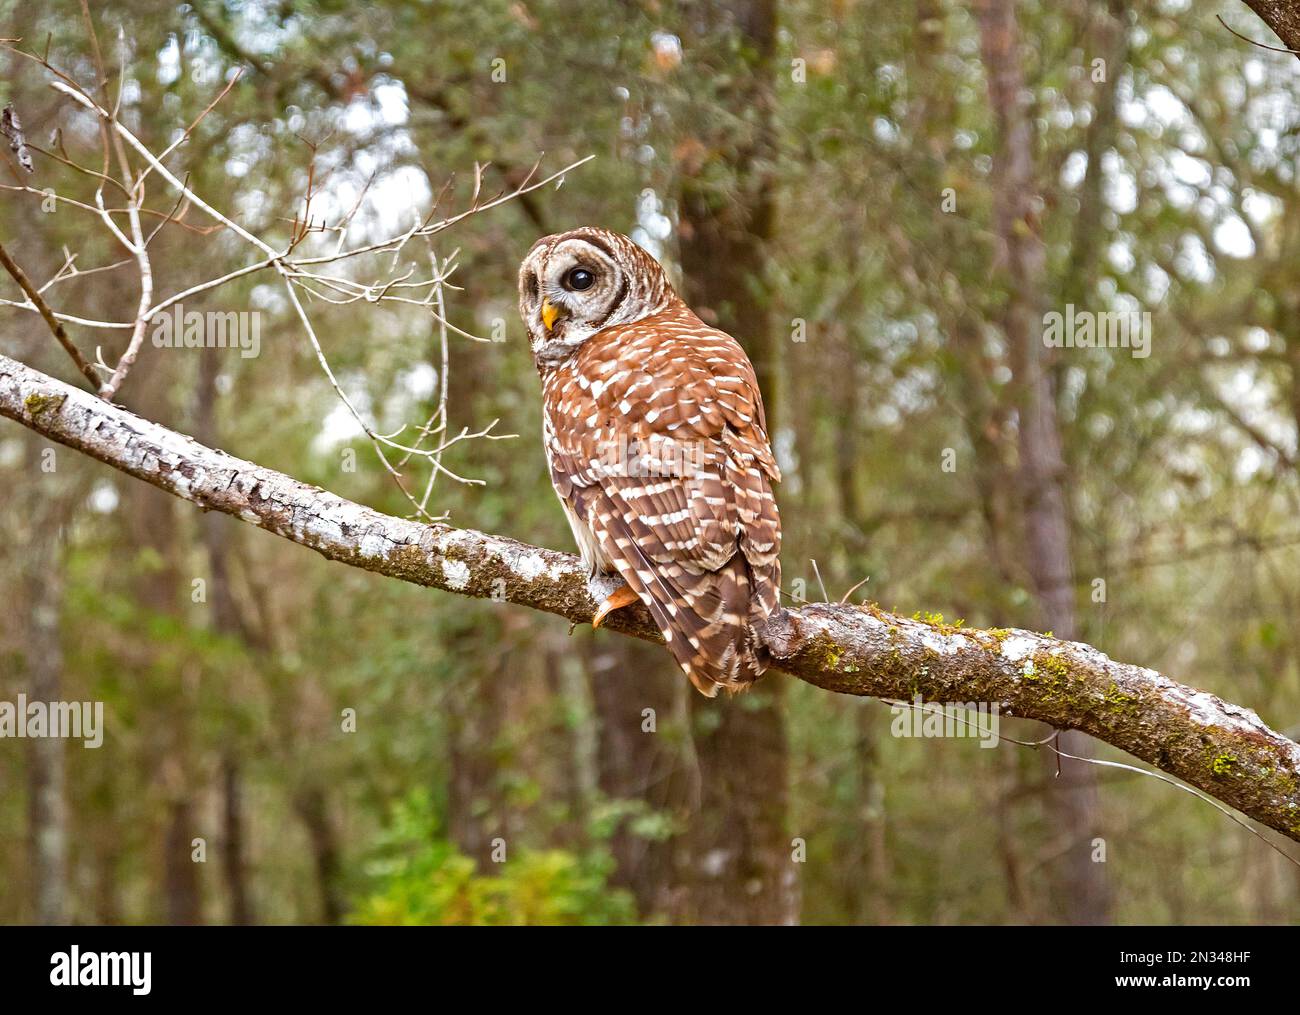 Barred Owls or Strix varia, are also knows as Hoot Owls are relatively large, mostly nocturnal owls who will eat almost anything made of meat in Stock Photo